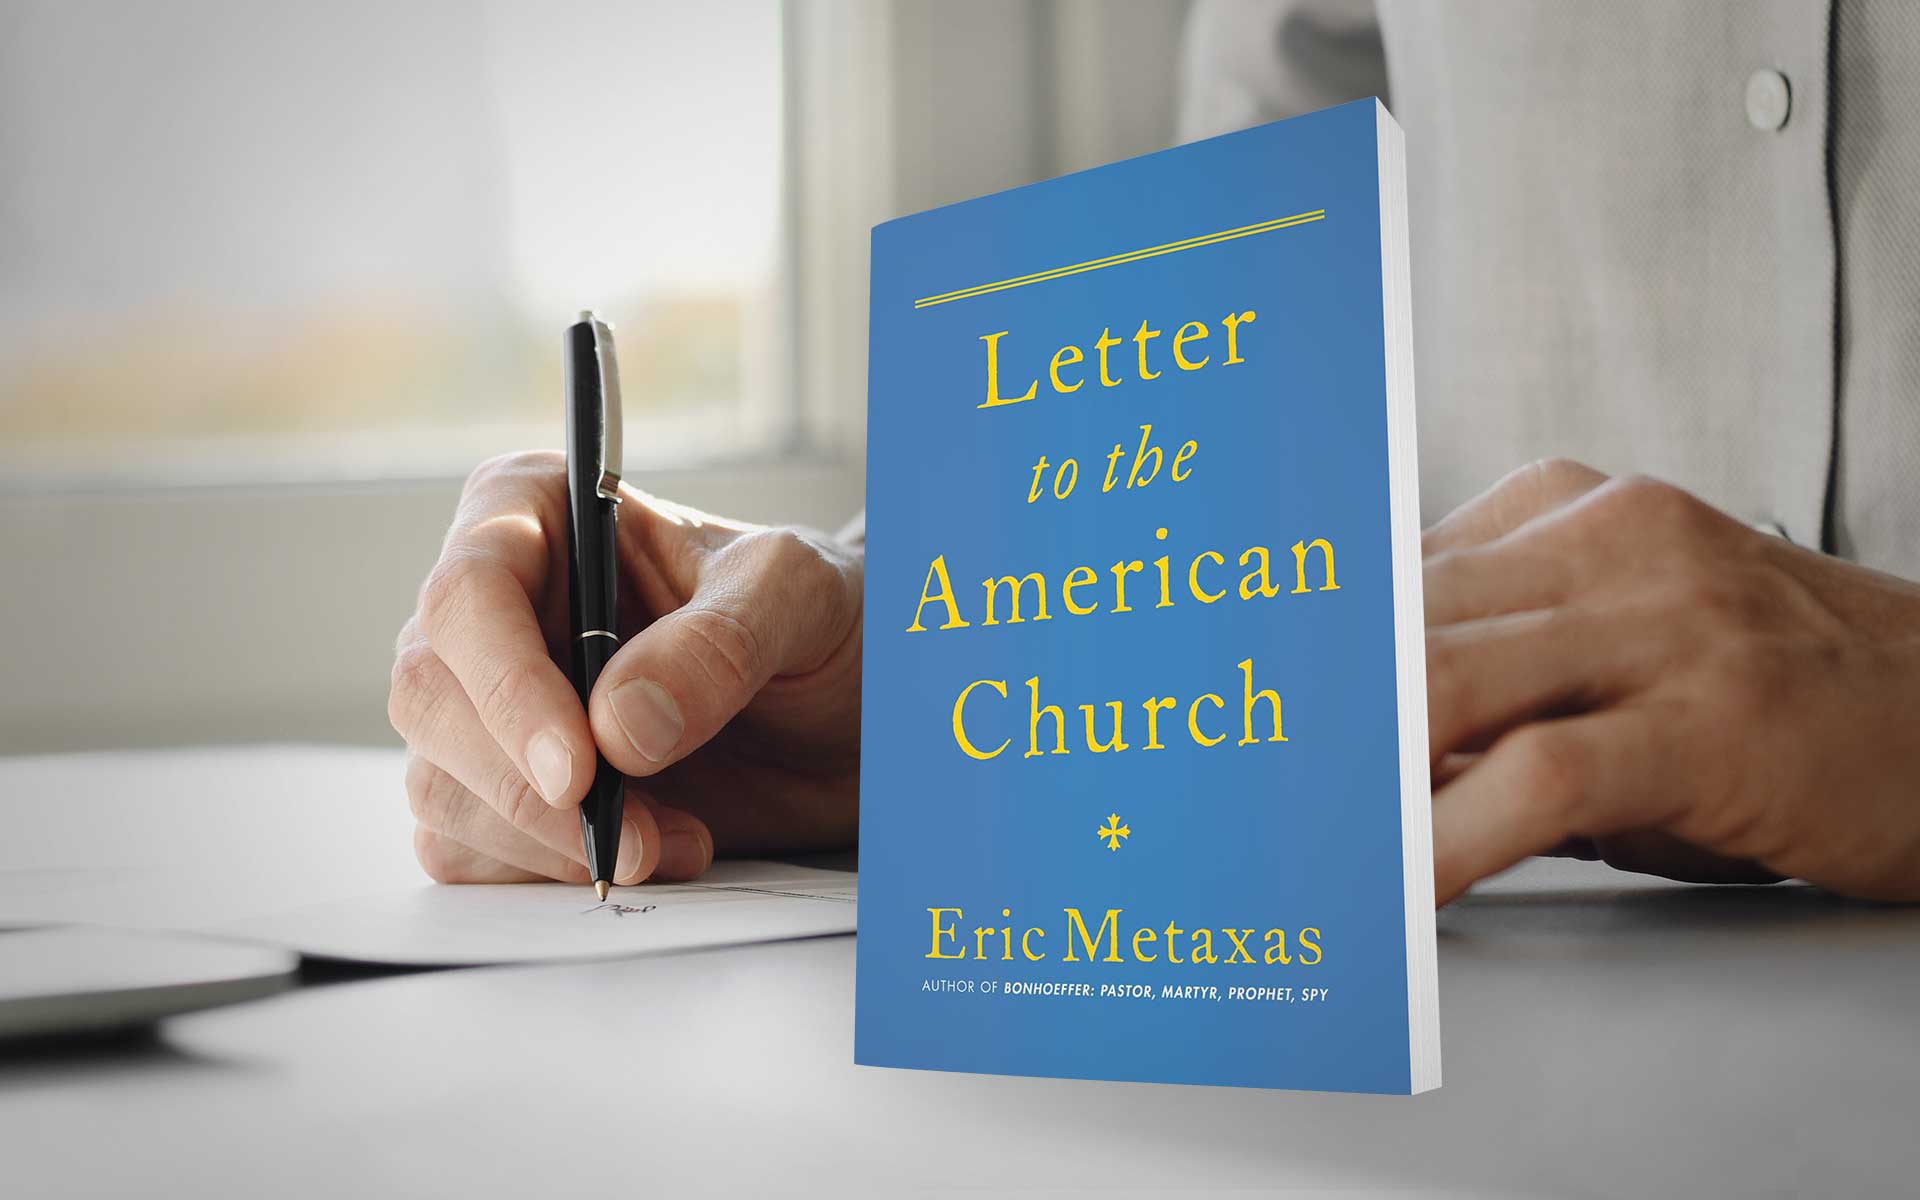 Letter to the American Church: Faith Without Works is Dead - Part 2